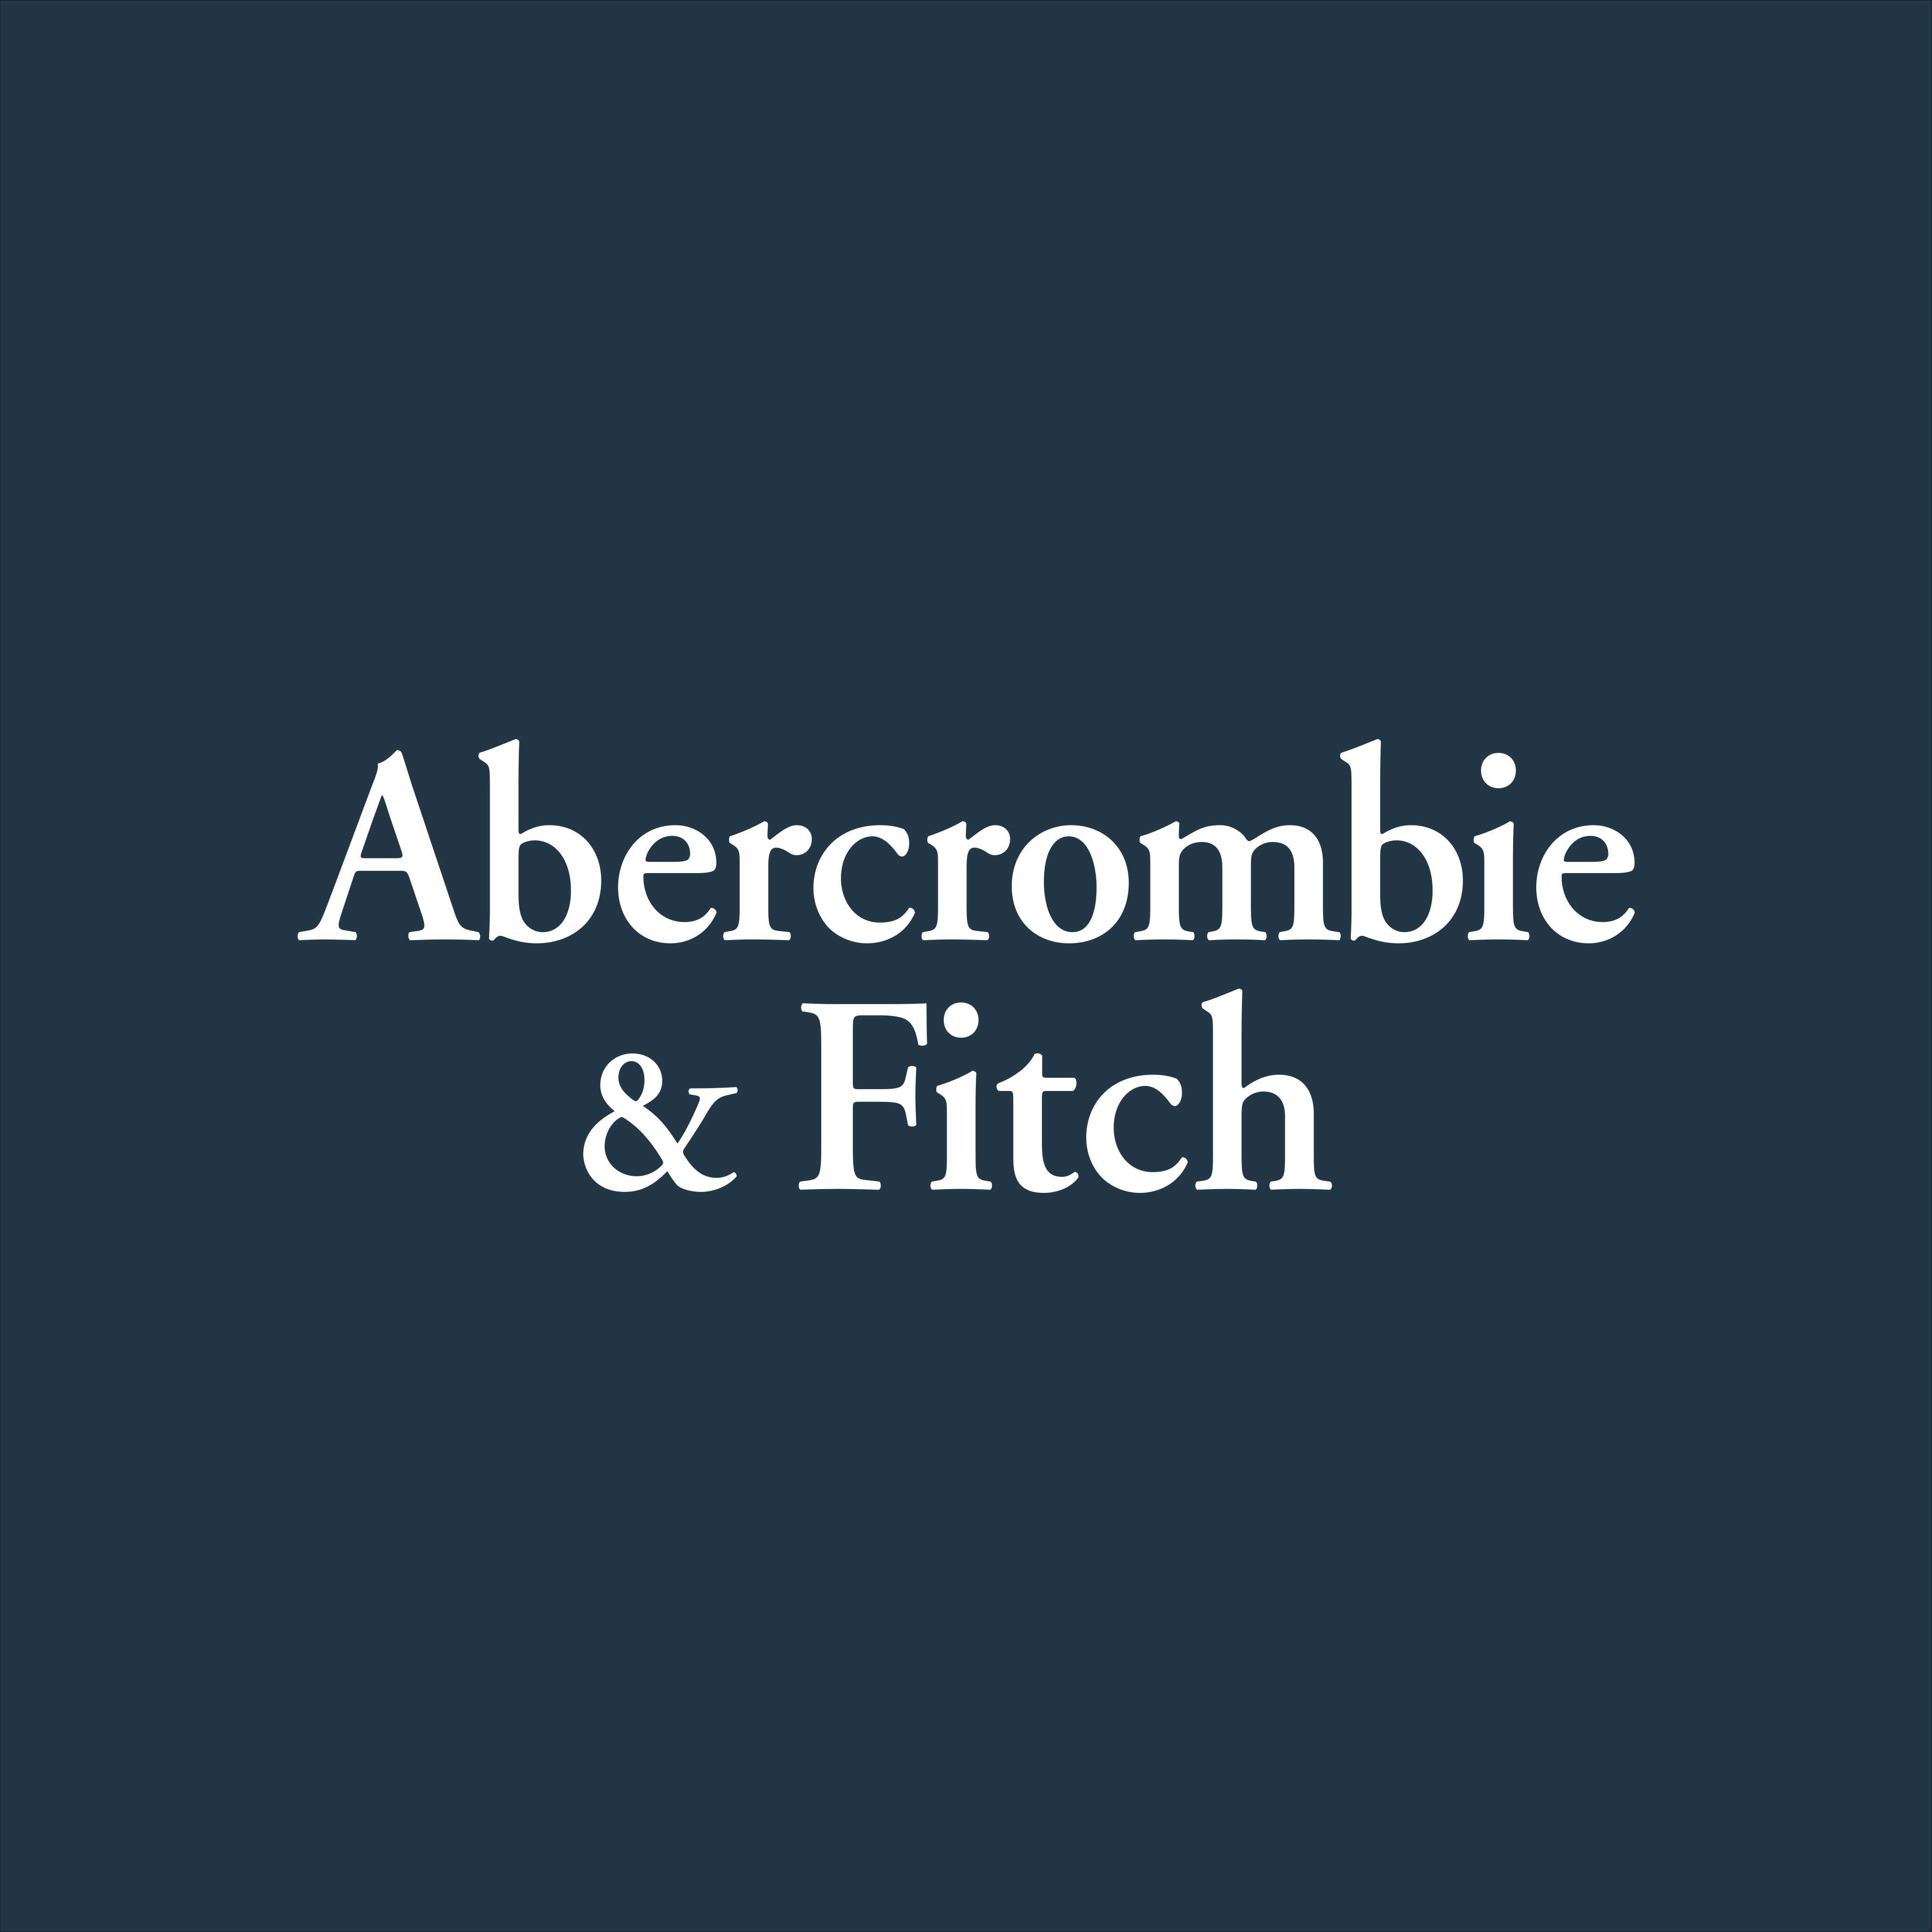 Abercrombie & Fitch Kids 50% off + Free Shipping - My Frugal